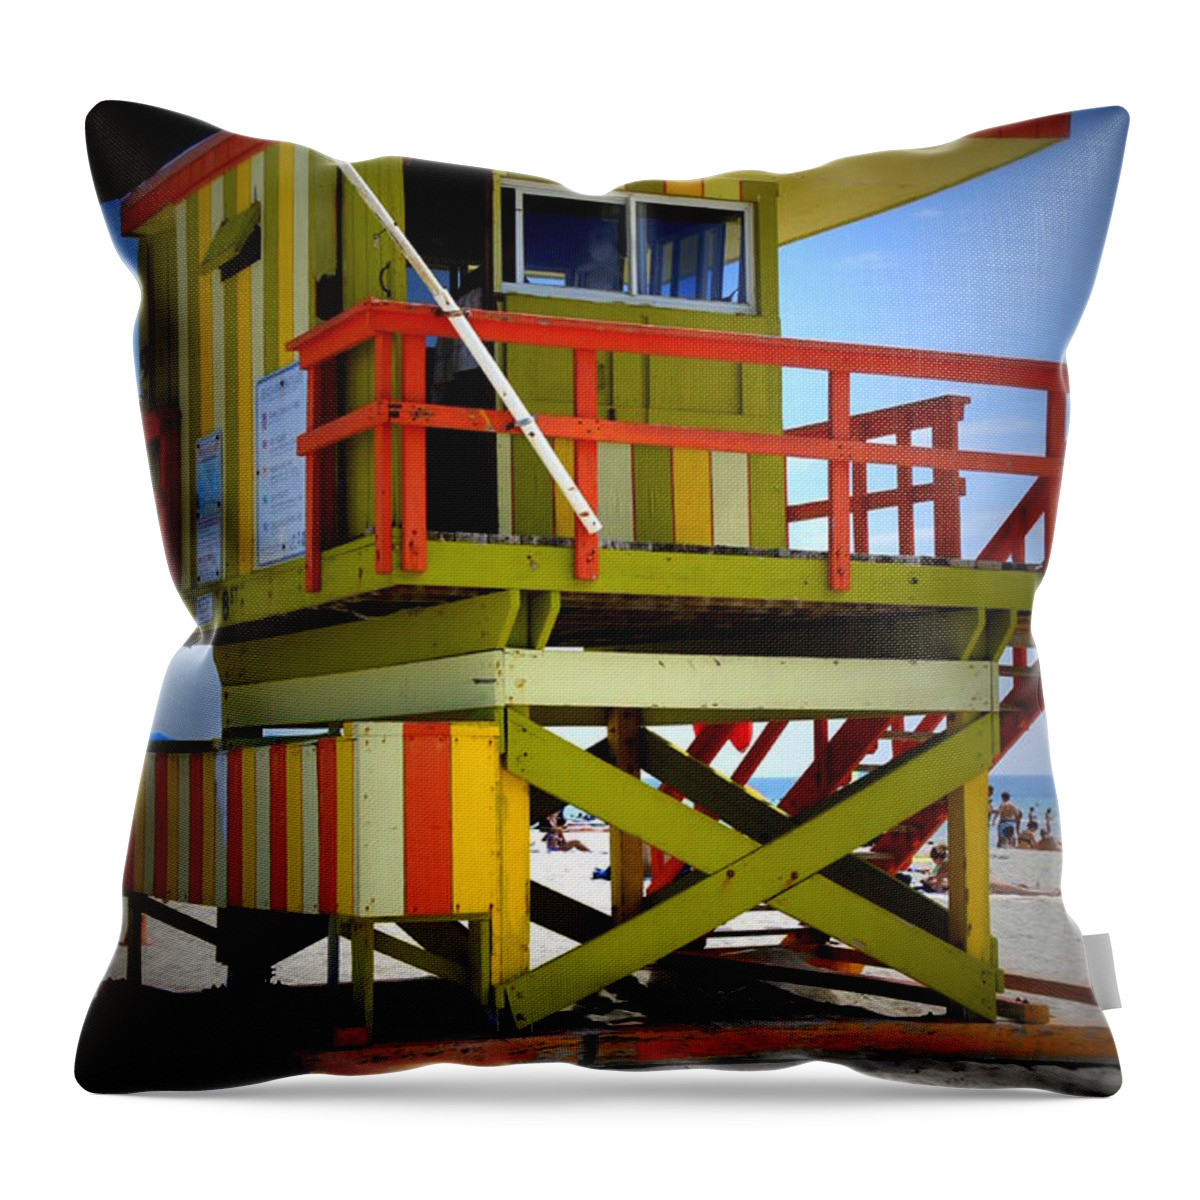 Miami Throw Pillow featuring the photograph Miami Shack by Laurie Perry